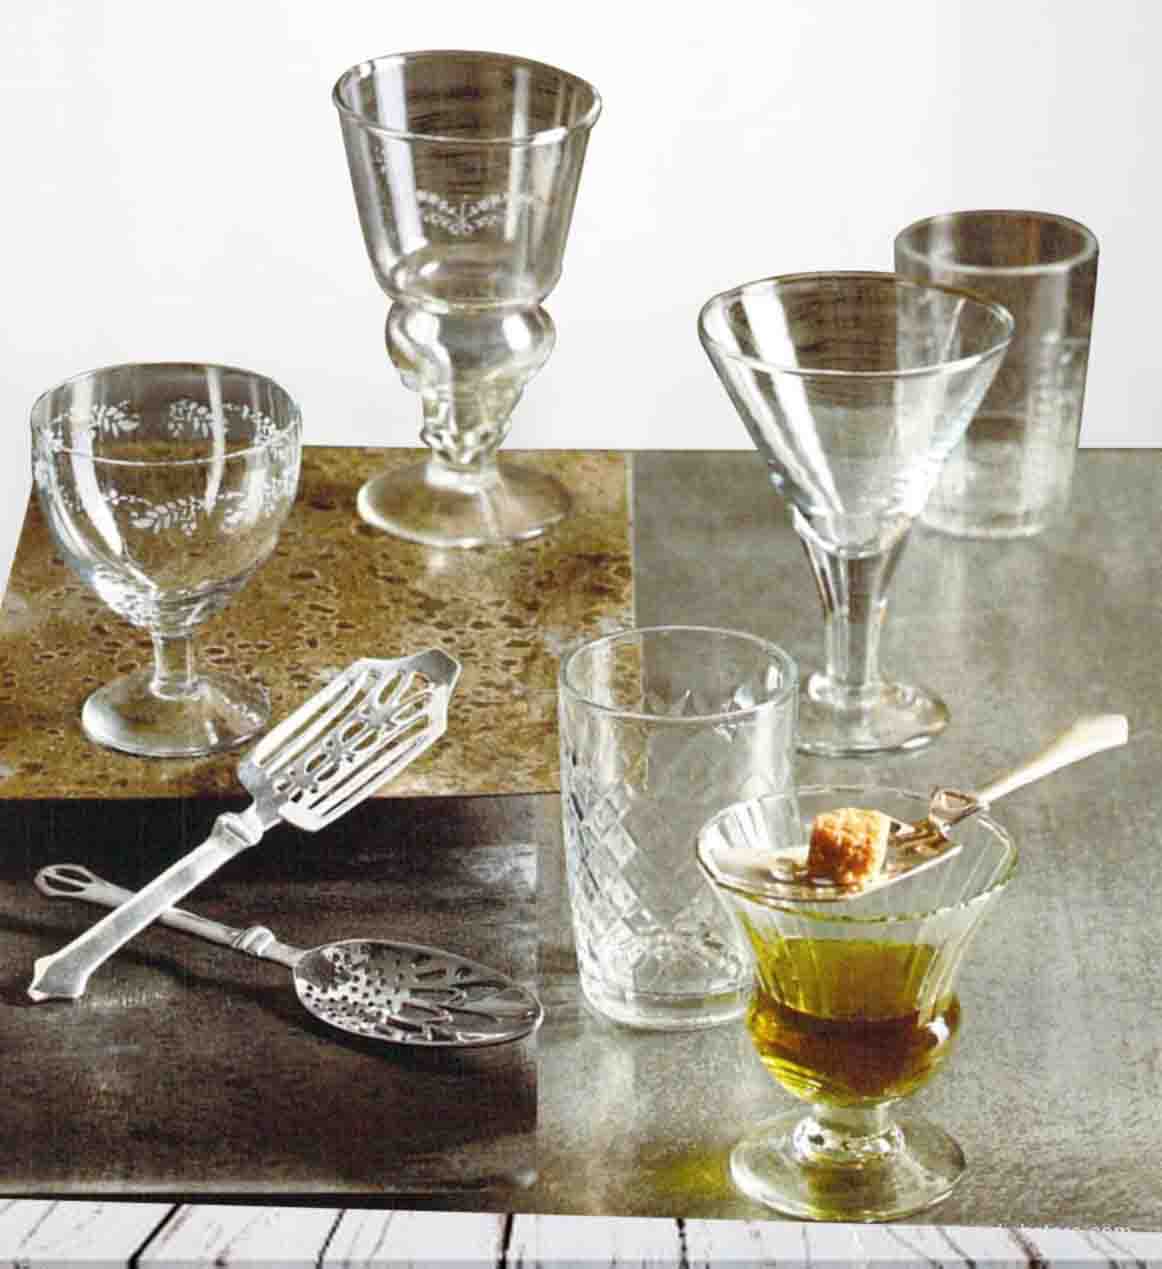 Roost St. Remy Aperitif Glasses & Absinthe Spoons-10